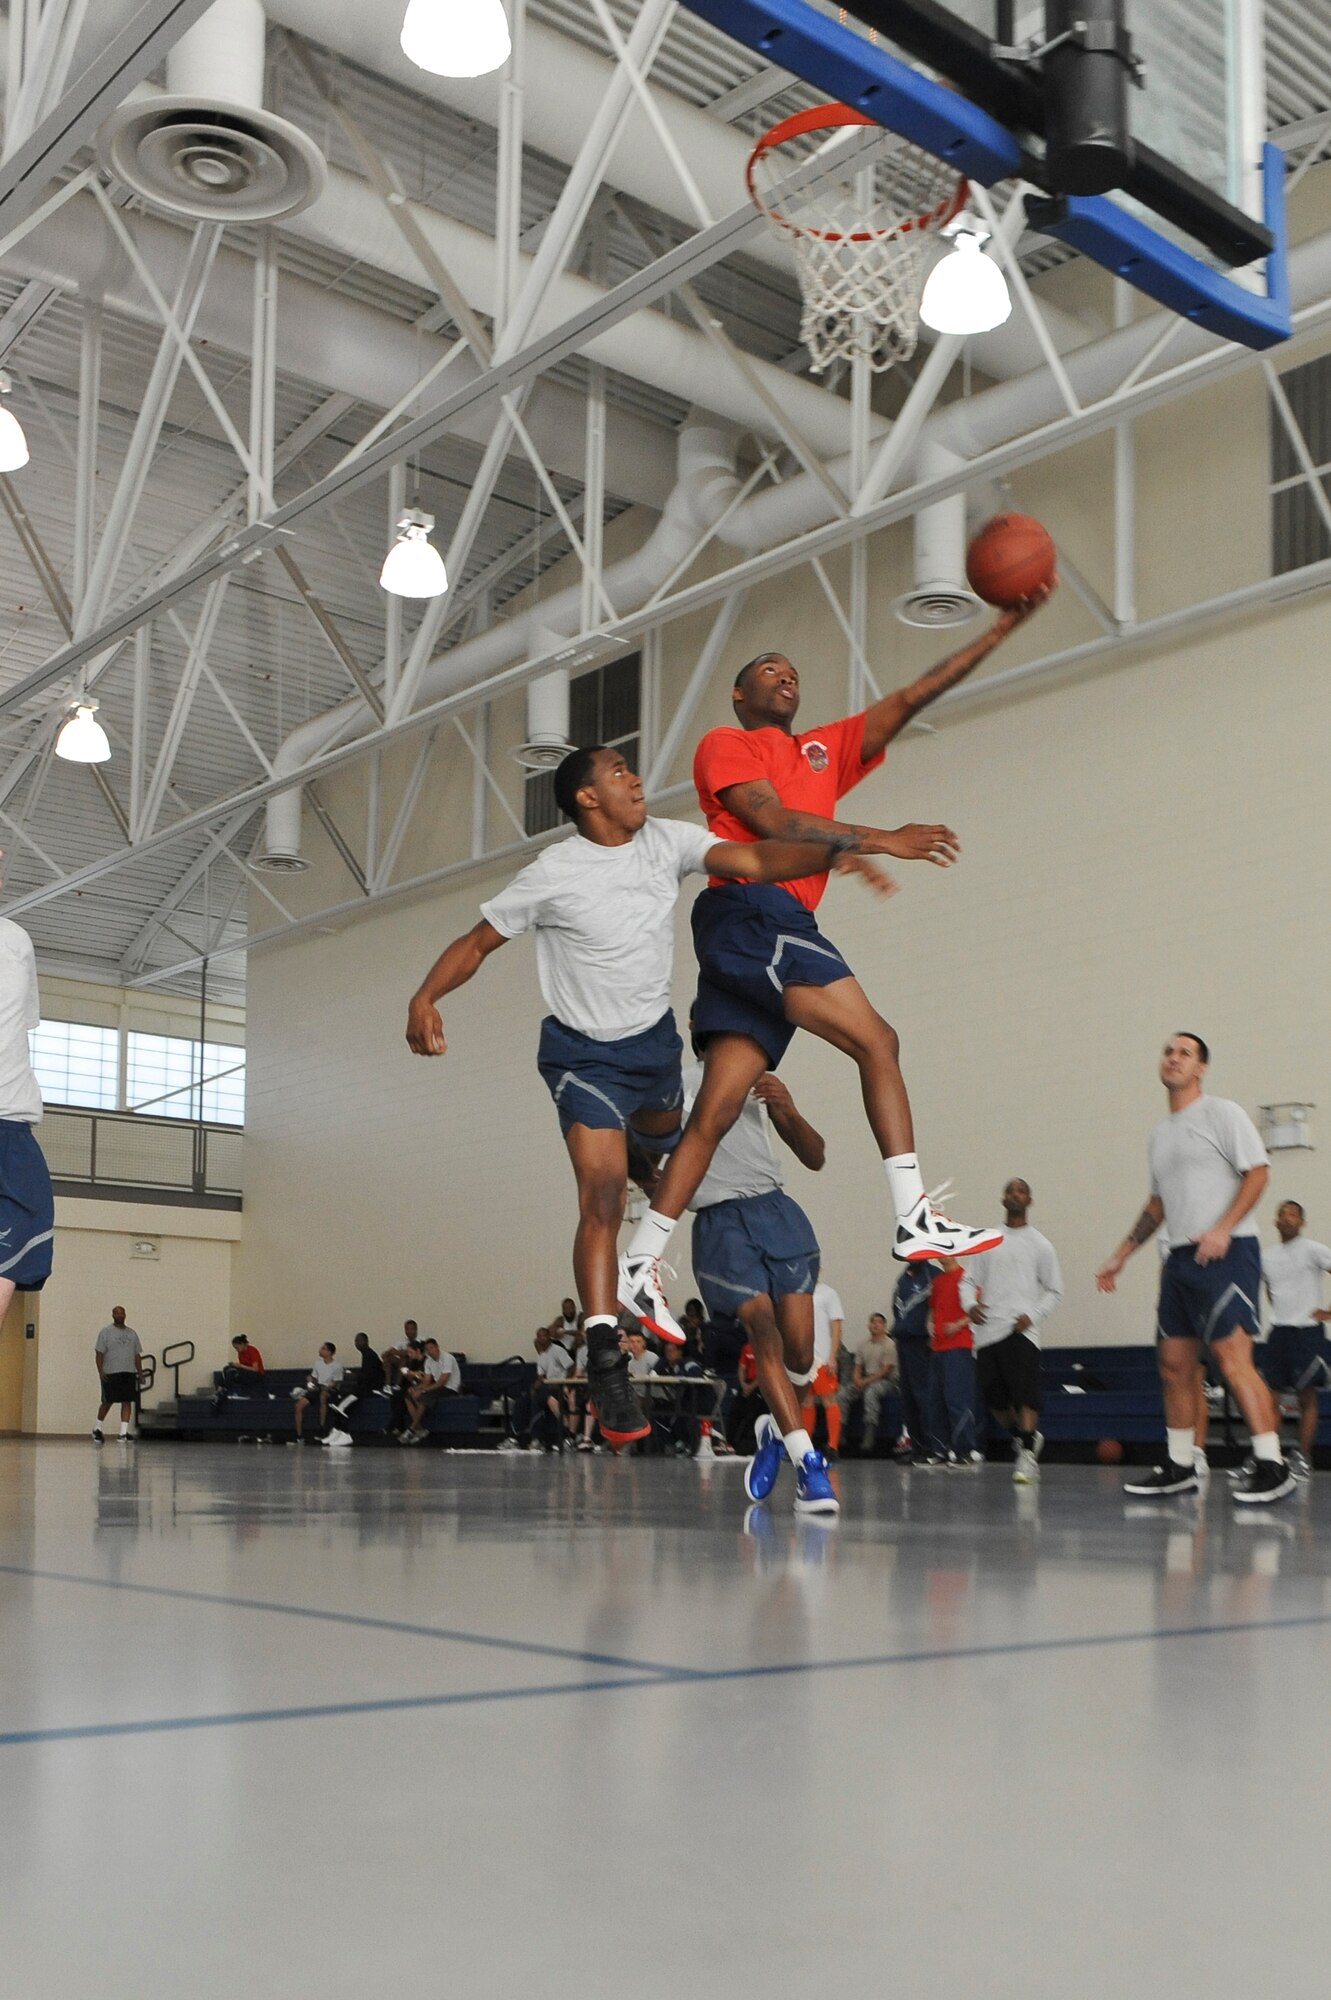 An Airman makes a lay-up during the 2012 Sports Day on Barksdale Air Force Base, La., Nov. 16. The 2nd Force Support Squadron won the Sports Day basketball tournament. Sports Day is comprised of various competitive athletic events to help promote physical fitness. (U.S. Air Force photo/Senior Airman Micaiah Anthony)(RELEASED)